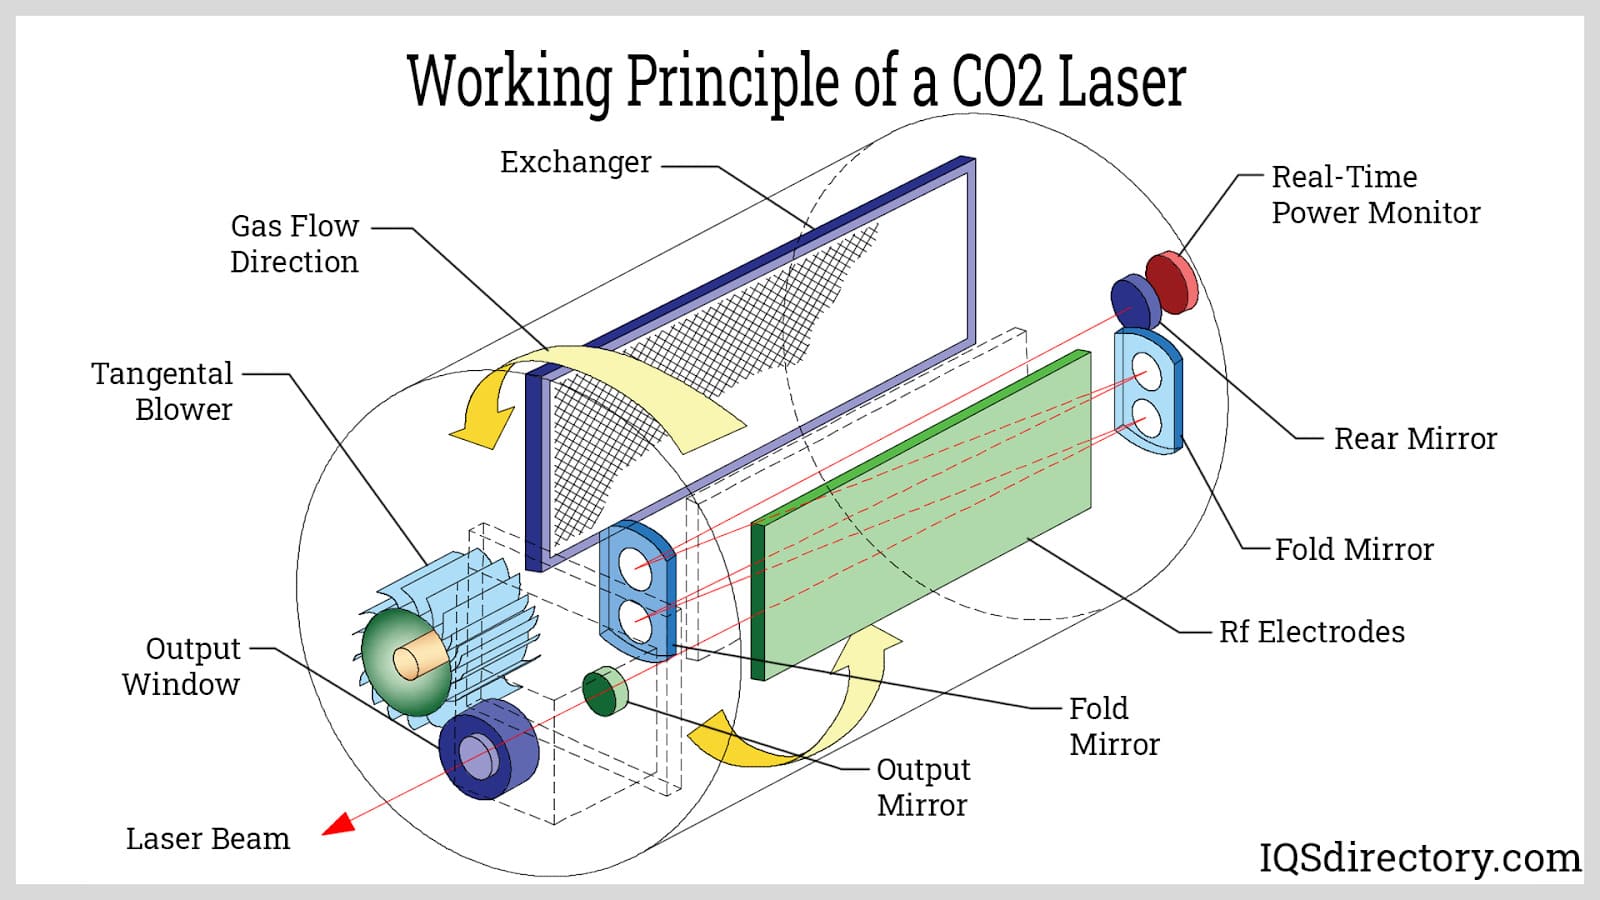 Working Principle of a CO2 Laser